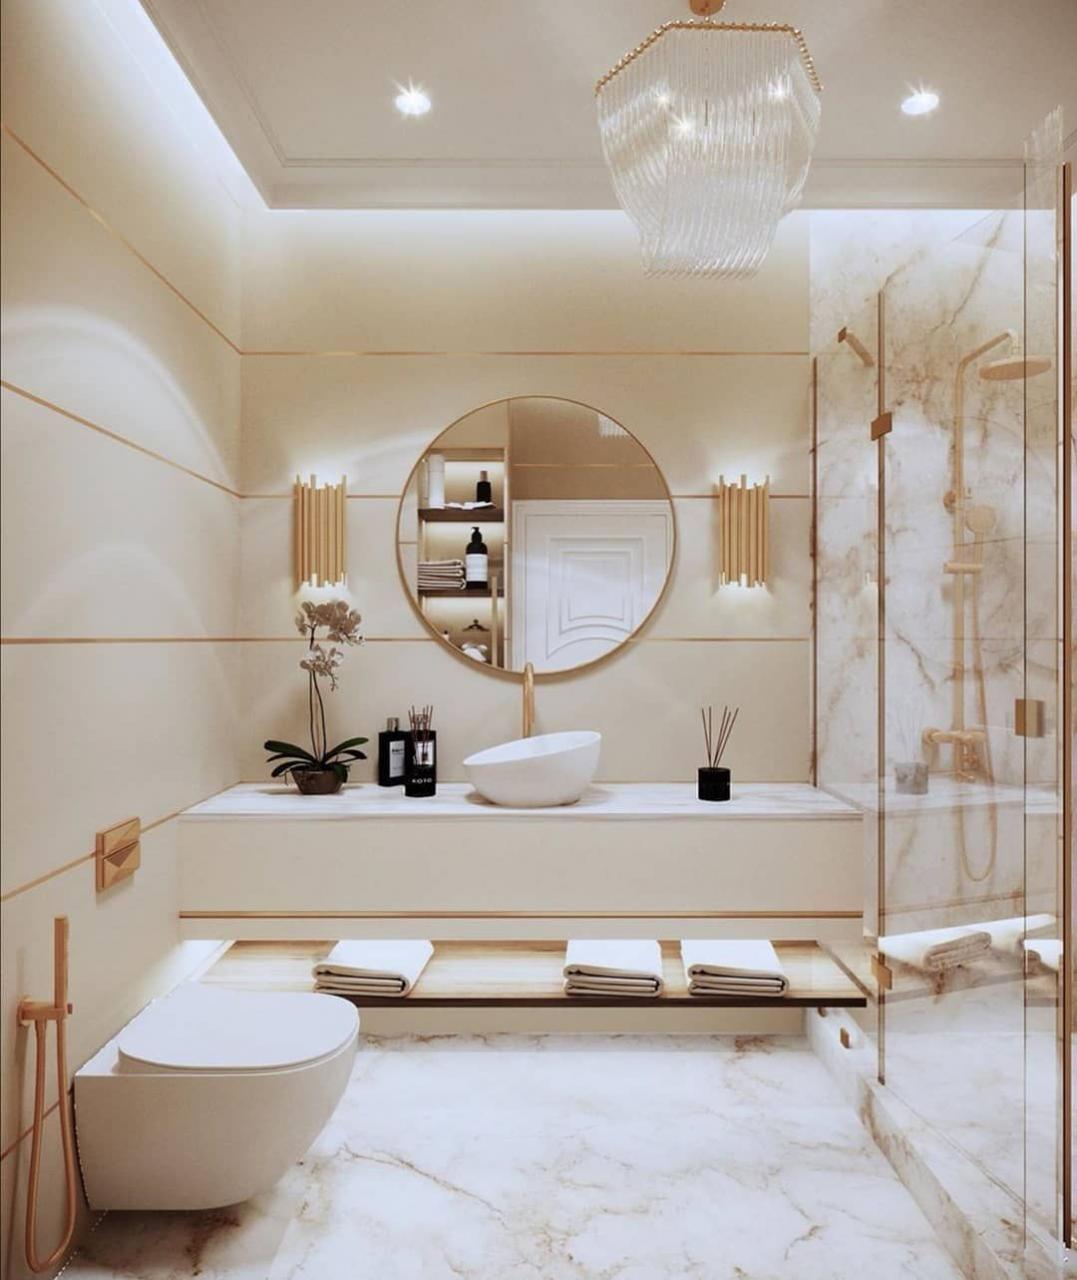 Luxury Drafts Interiors on Instagram "What do you think of this